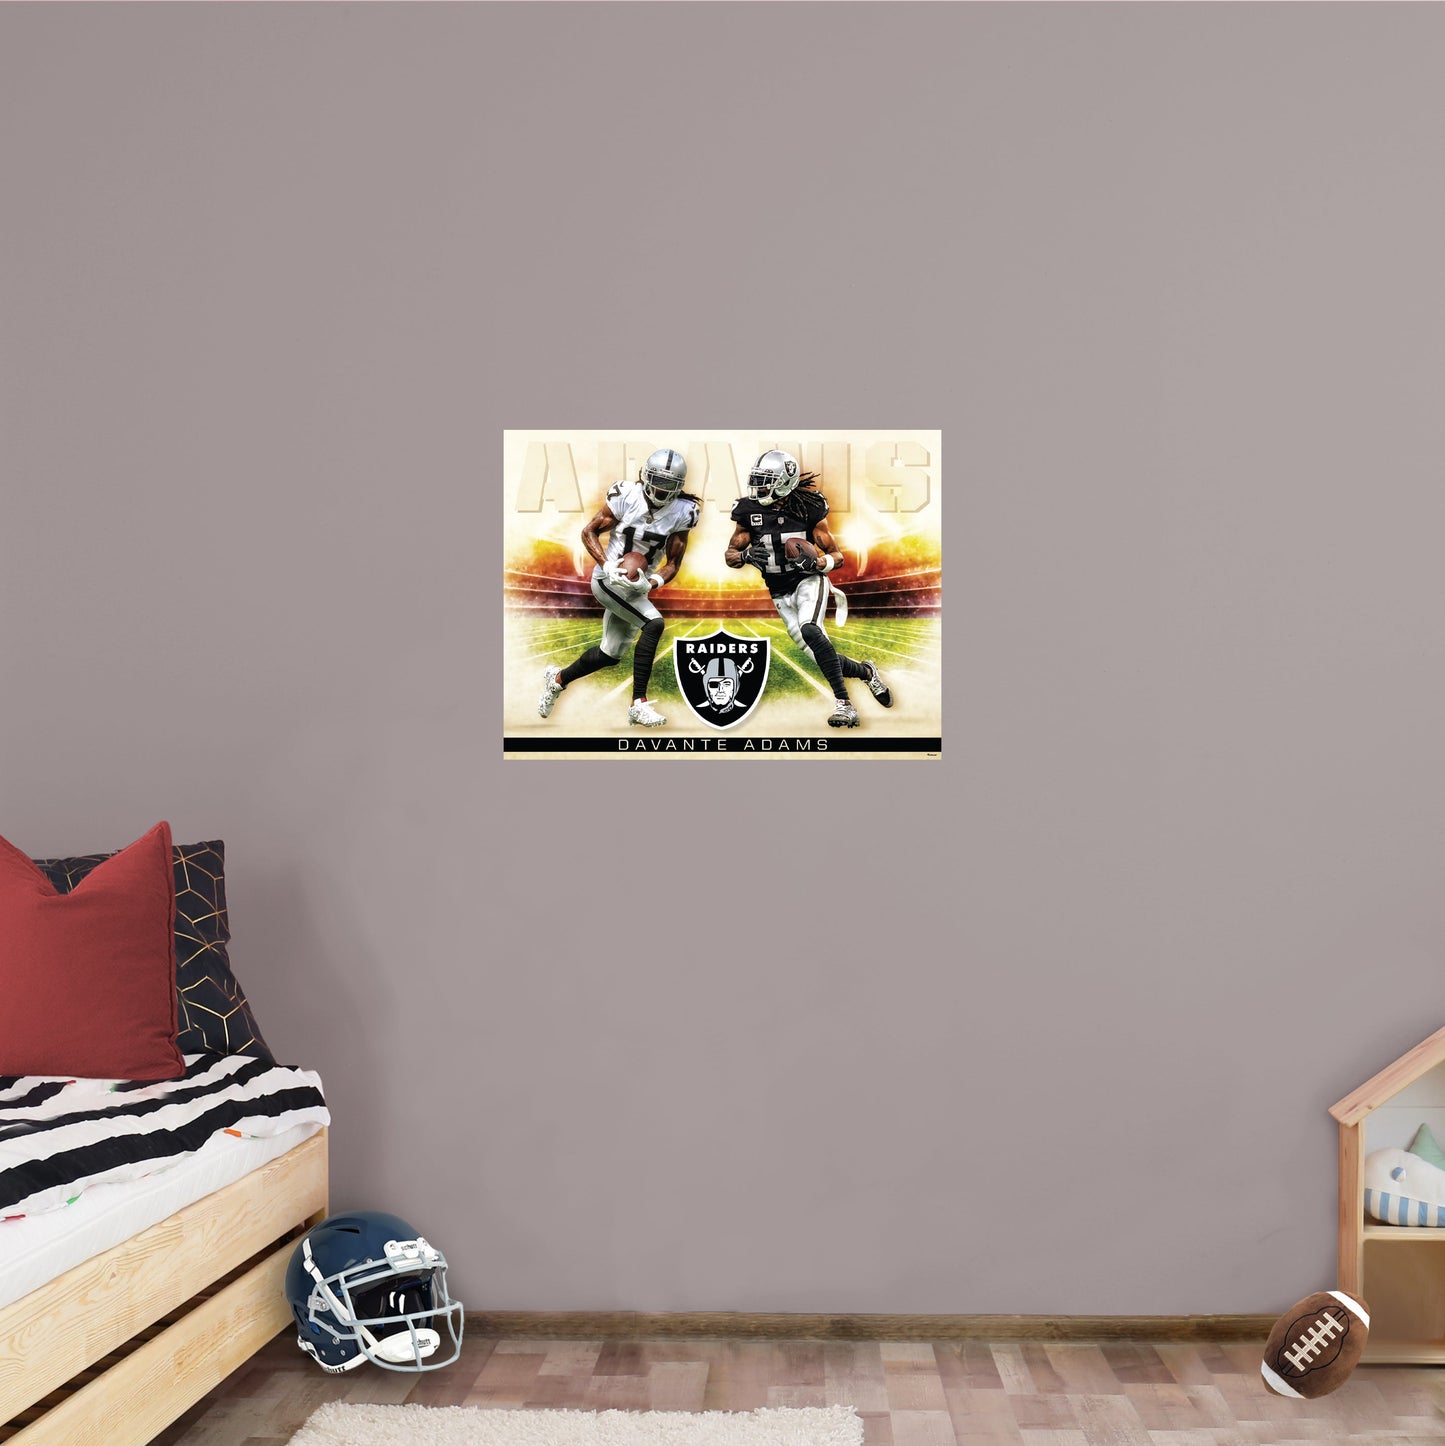 Las Vegas Raiders: Davante Adams Icon Poster - Officially Licensed NFL Removable Adhesive Decal